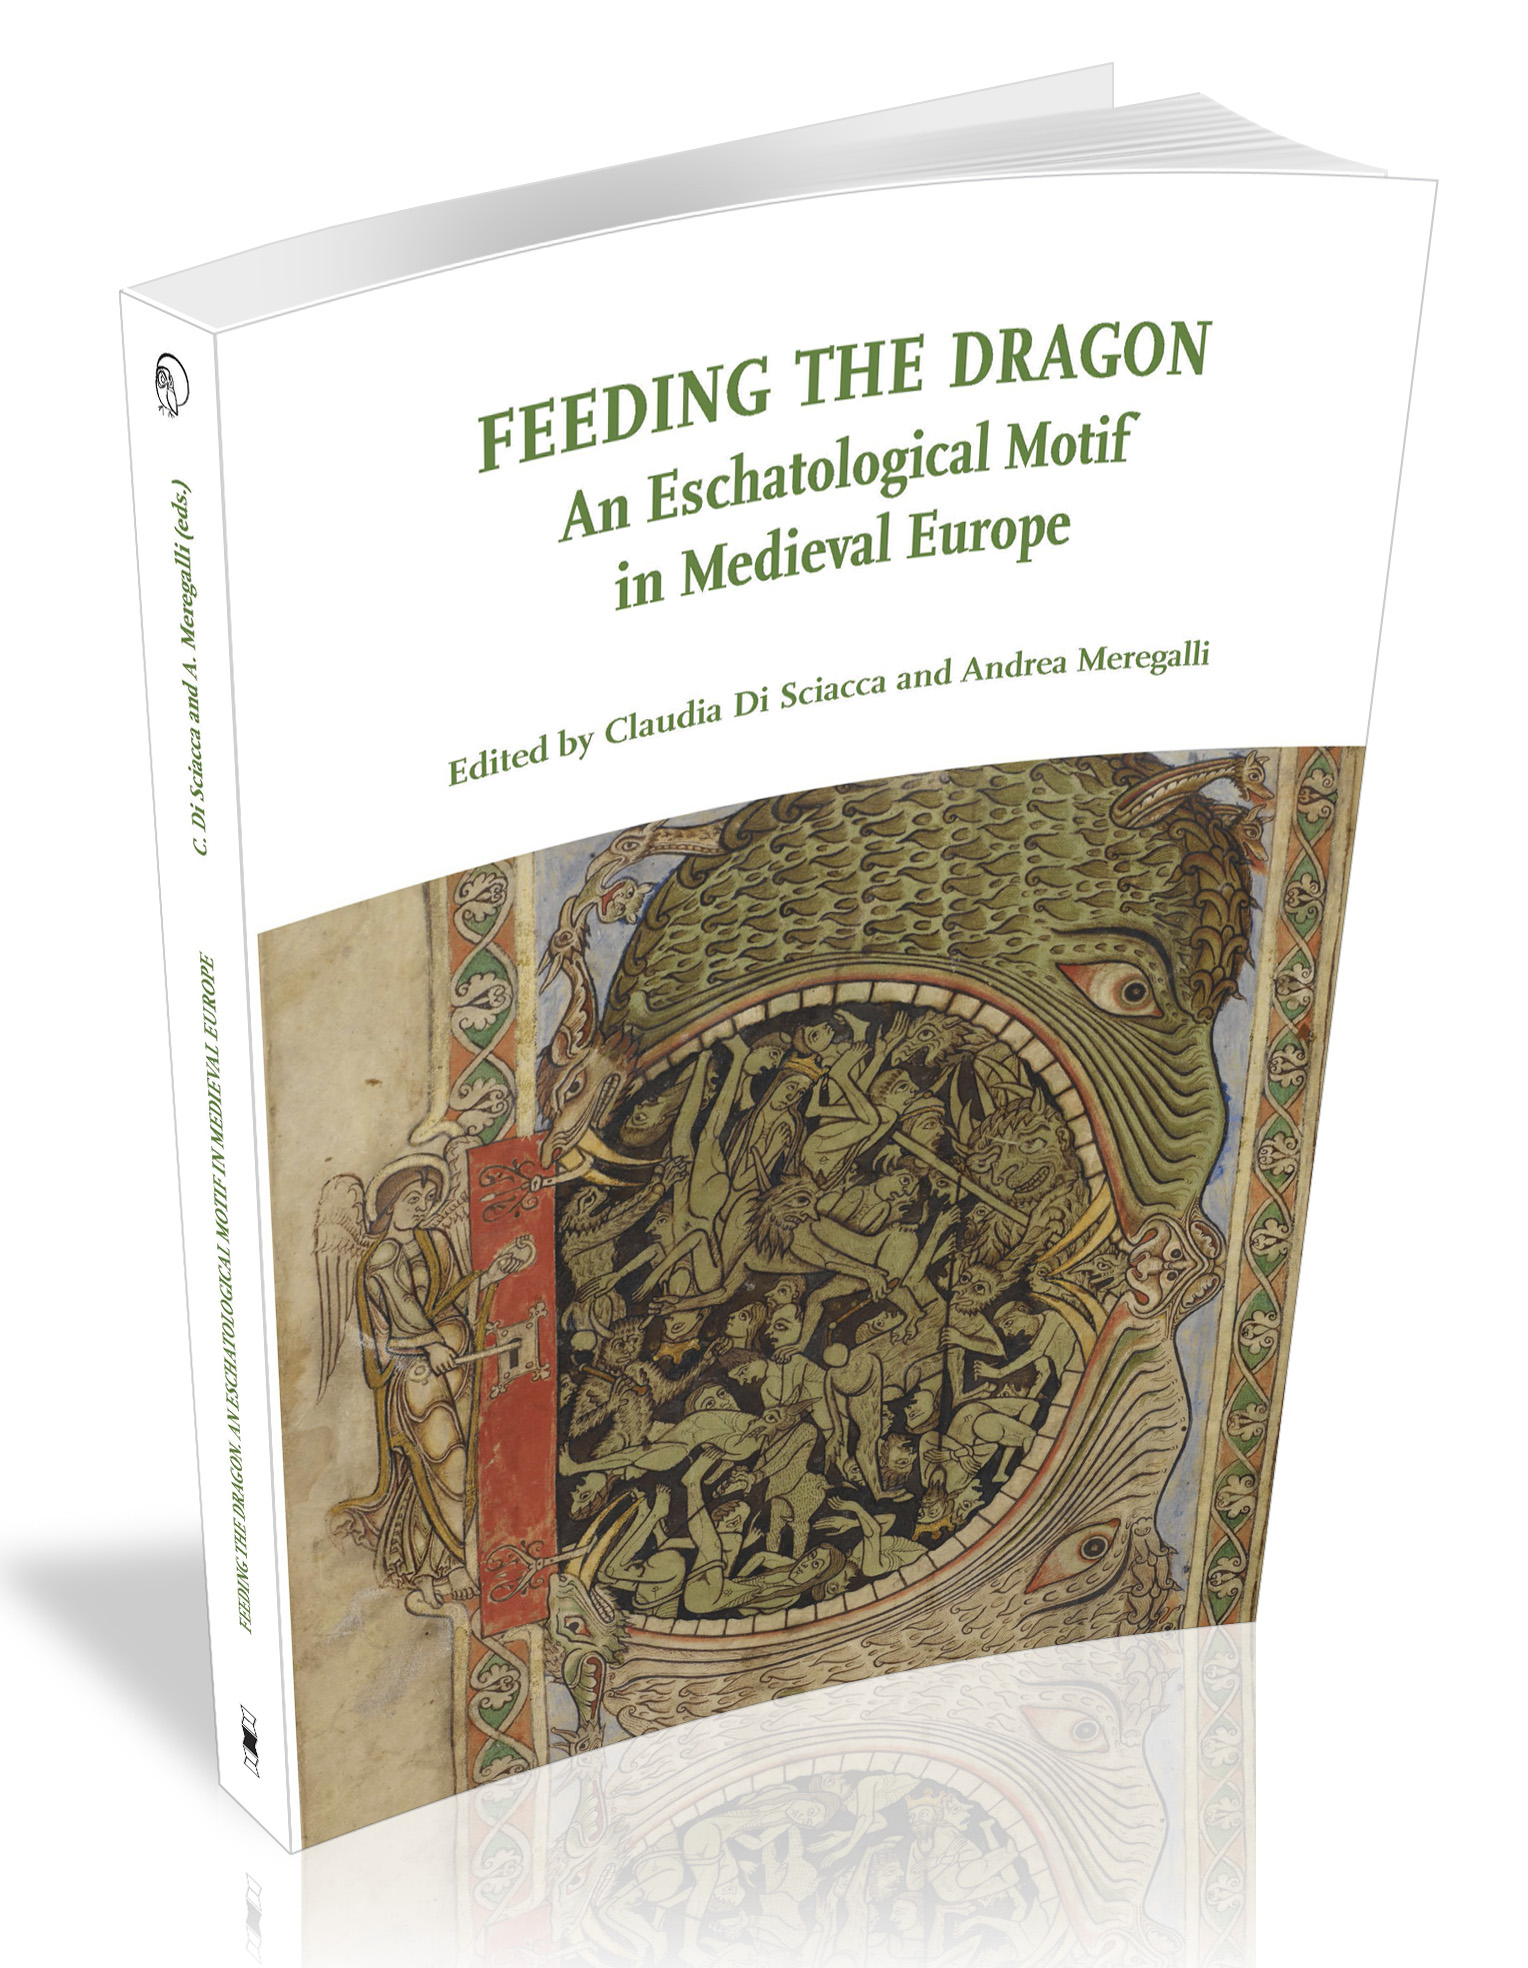 					Visualizza Feeding the Dragon. An Eschatological Motif in Medieval Europe
				